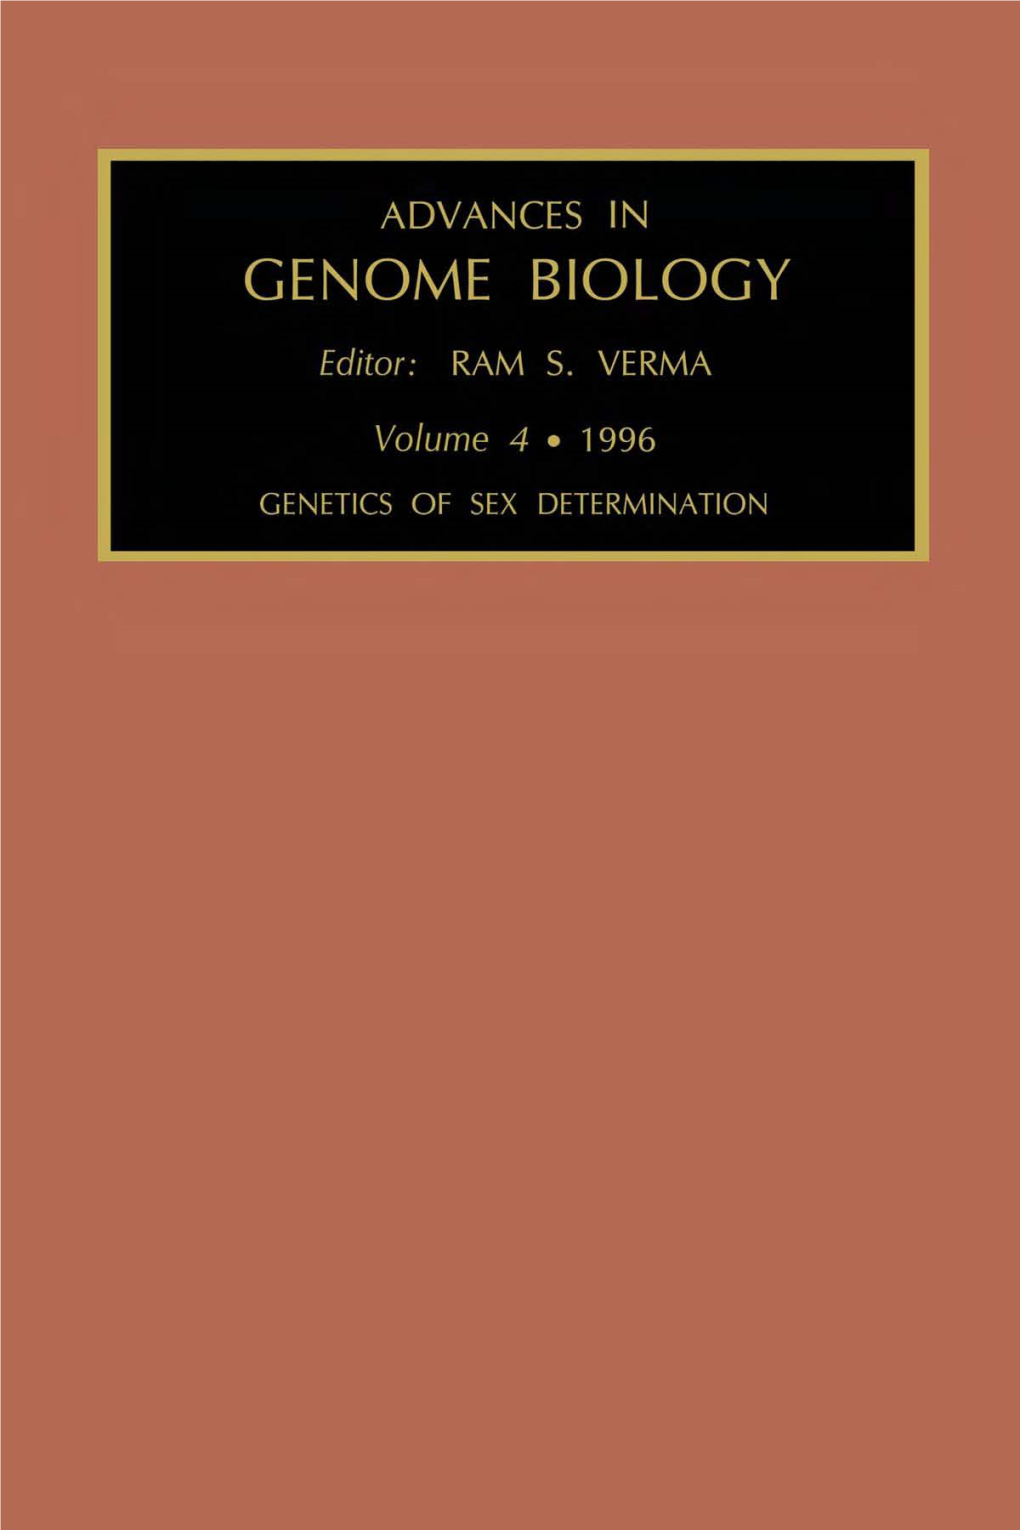 GENETICS of SEX DETERMINATION This Page Intentionally Left Blank ADVANCES in GENOME BIOLOGY